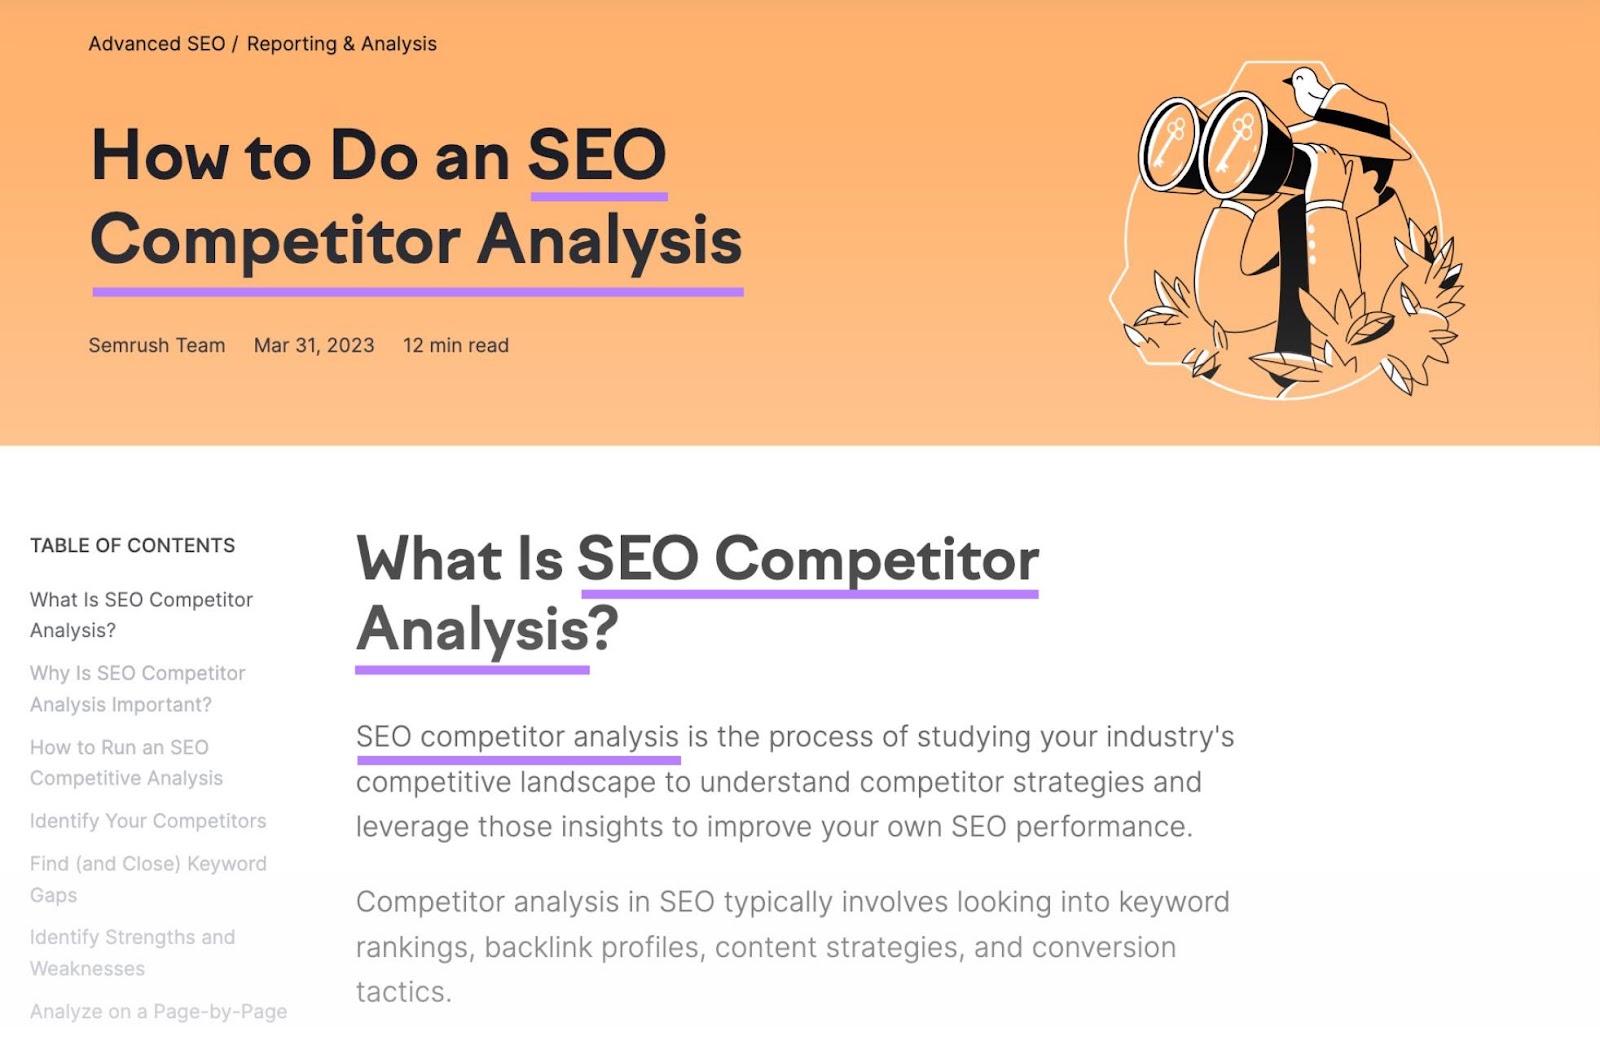 "How to DO an SEO Competitor Analysis" Semrush blog page